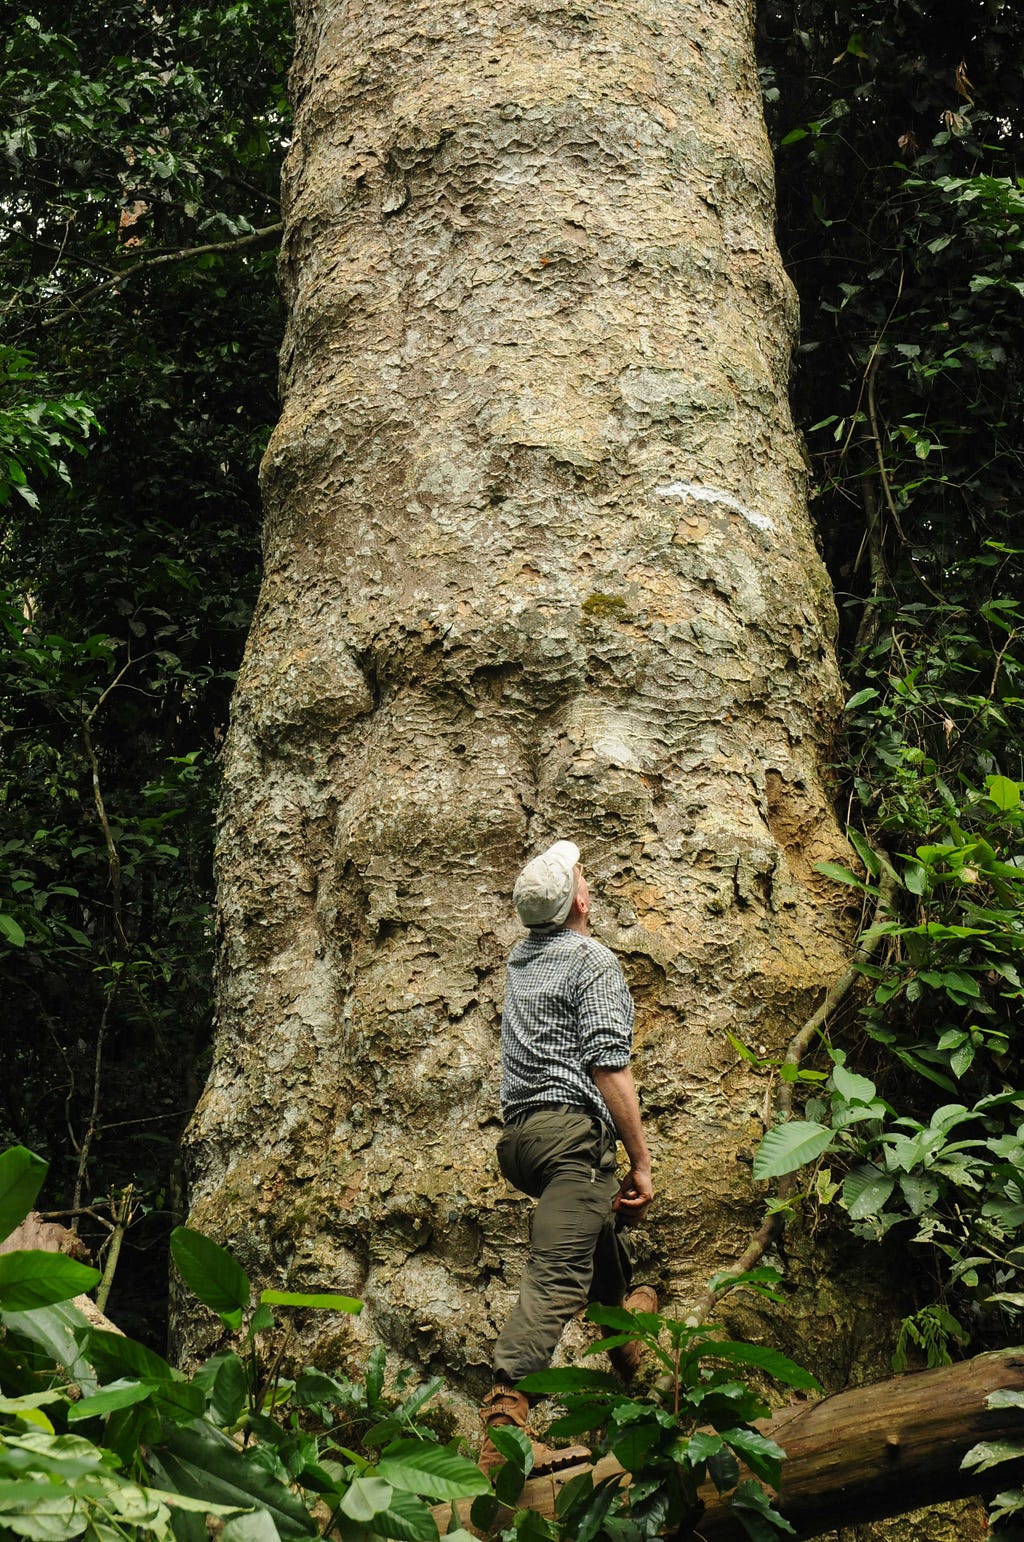 A man is dwarfed by a very tall and wide tree, the trunk of which has a very knobby appearance.